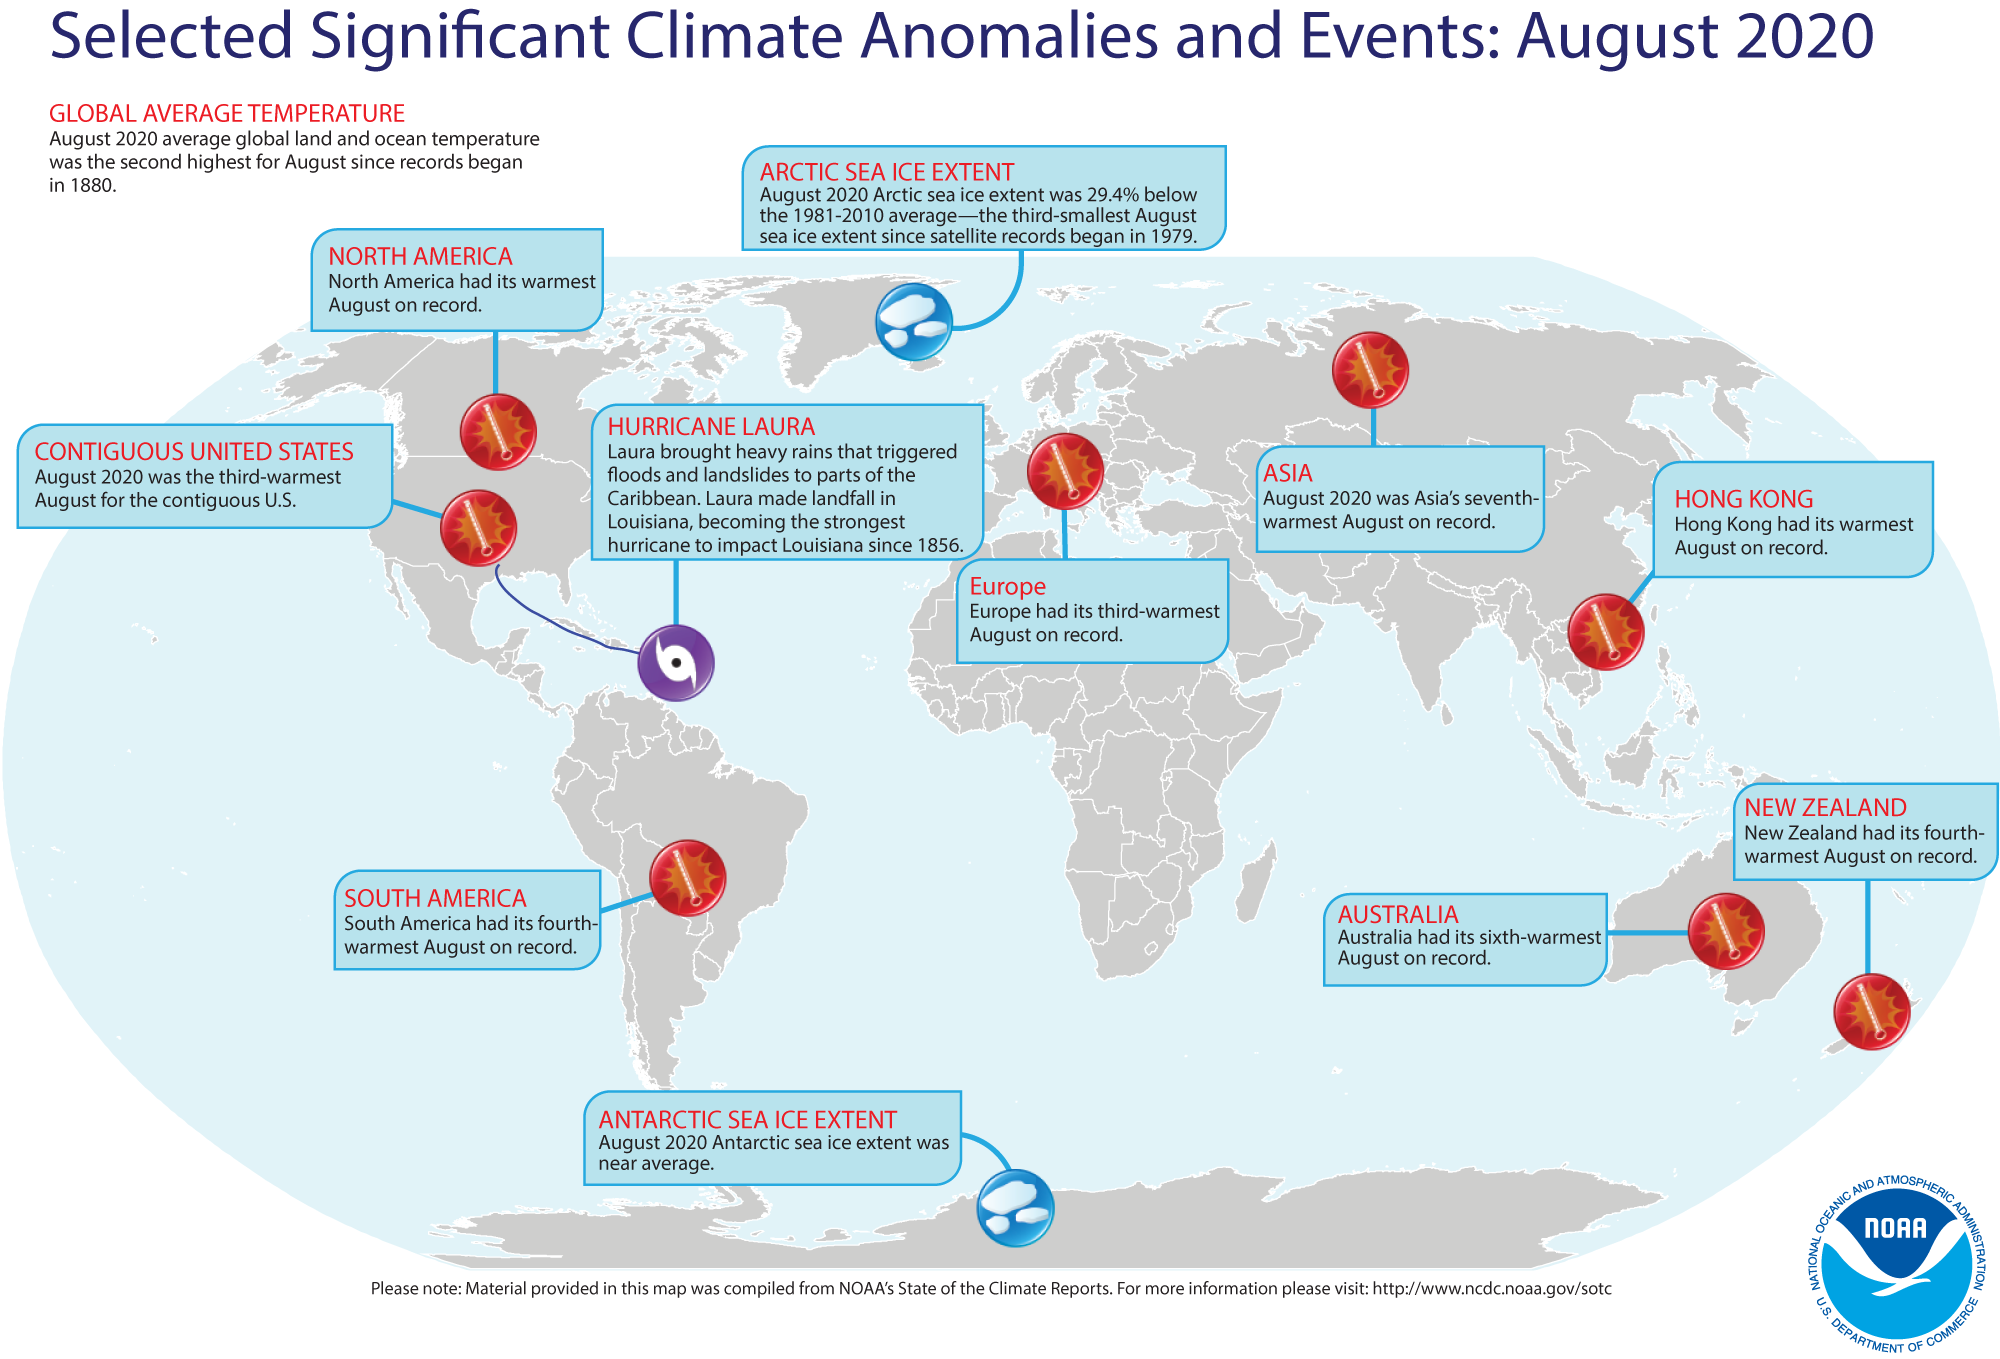 A global map plotted with some of the most significant weather and climate events that occurred during August 2020